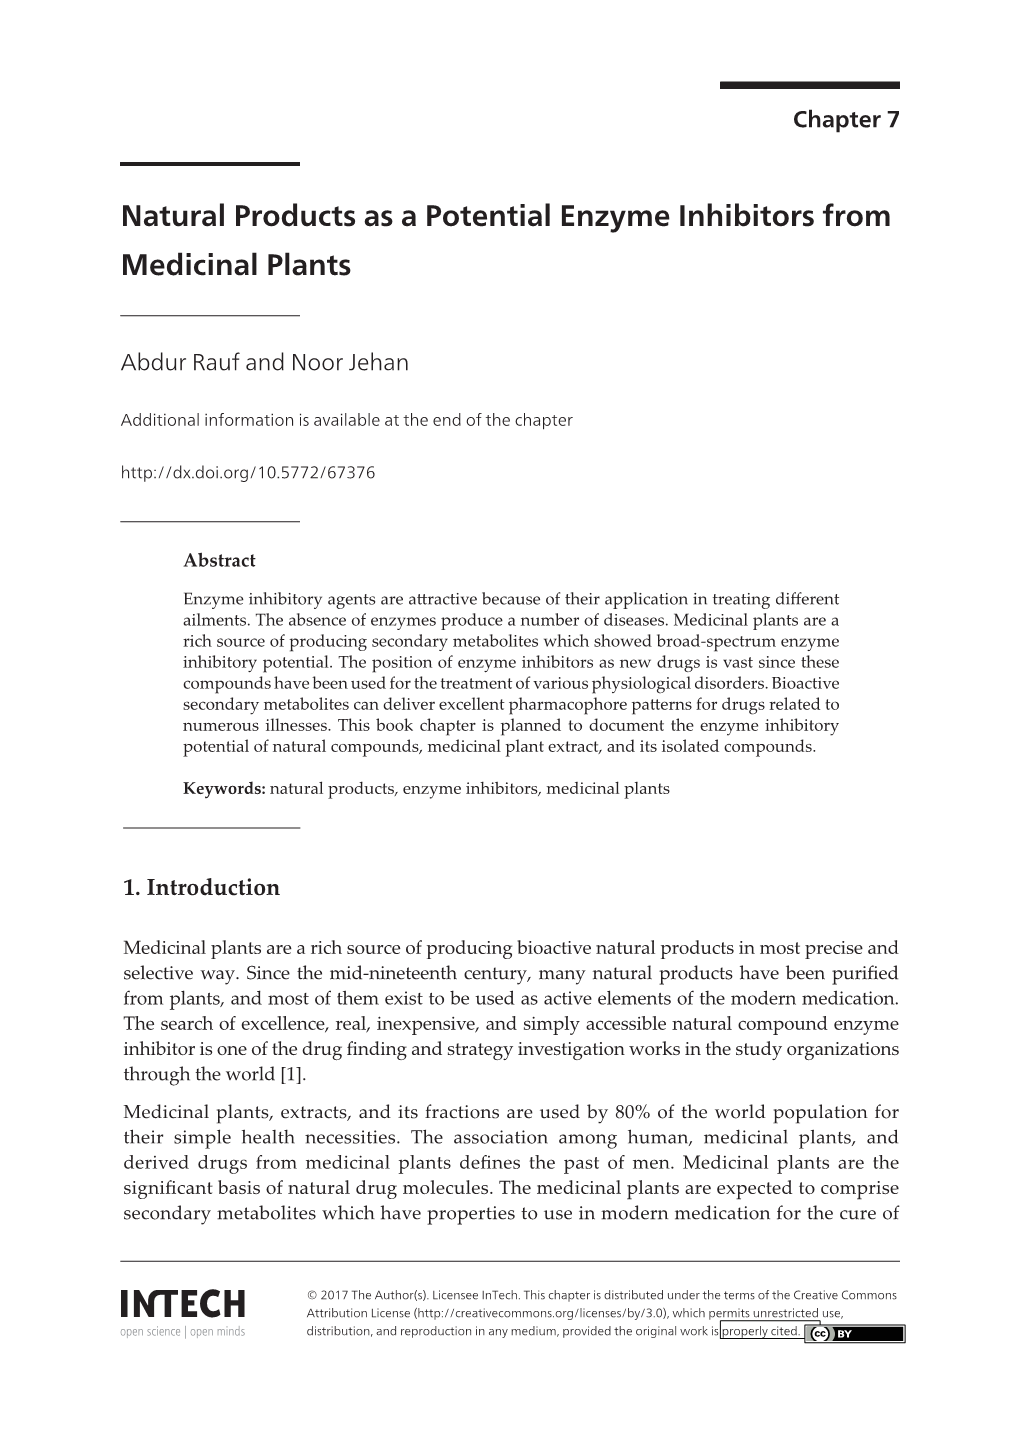 Natural Products As a Potential Enzyme Inhibitors from Medicinal Plants